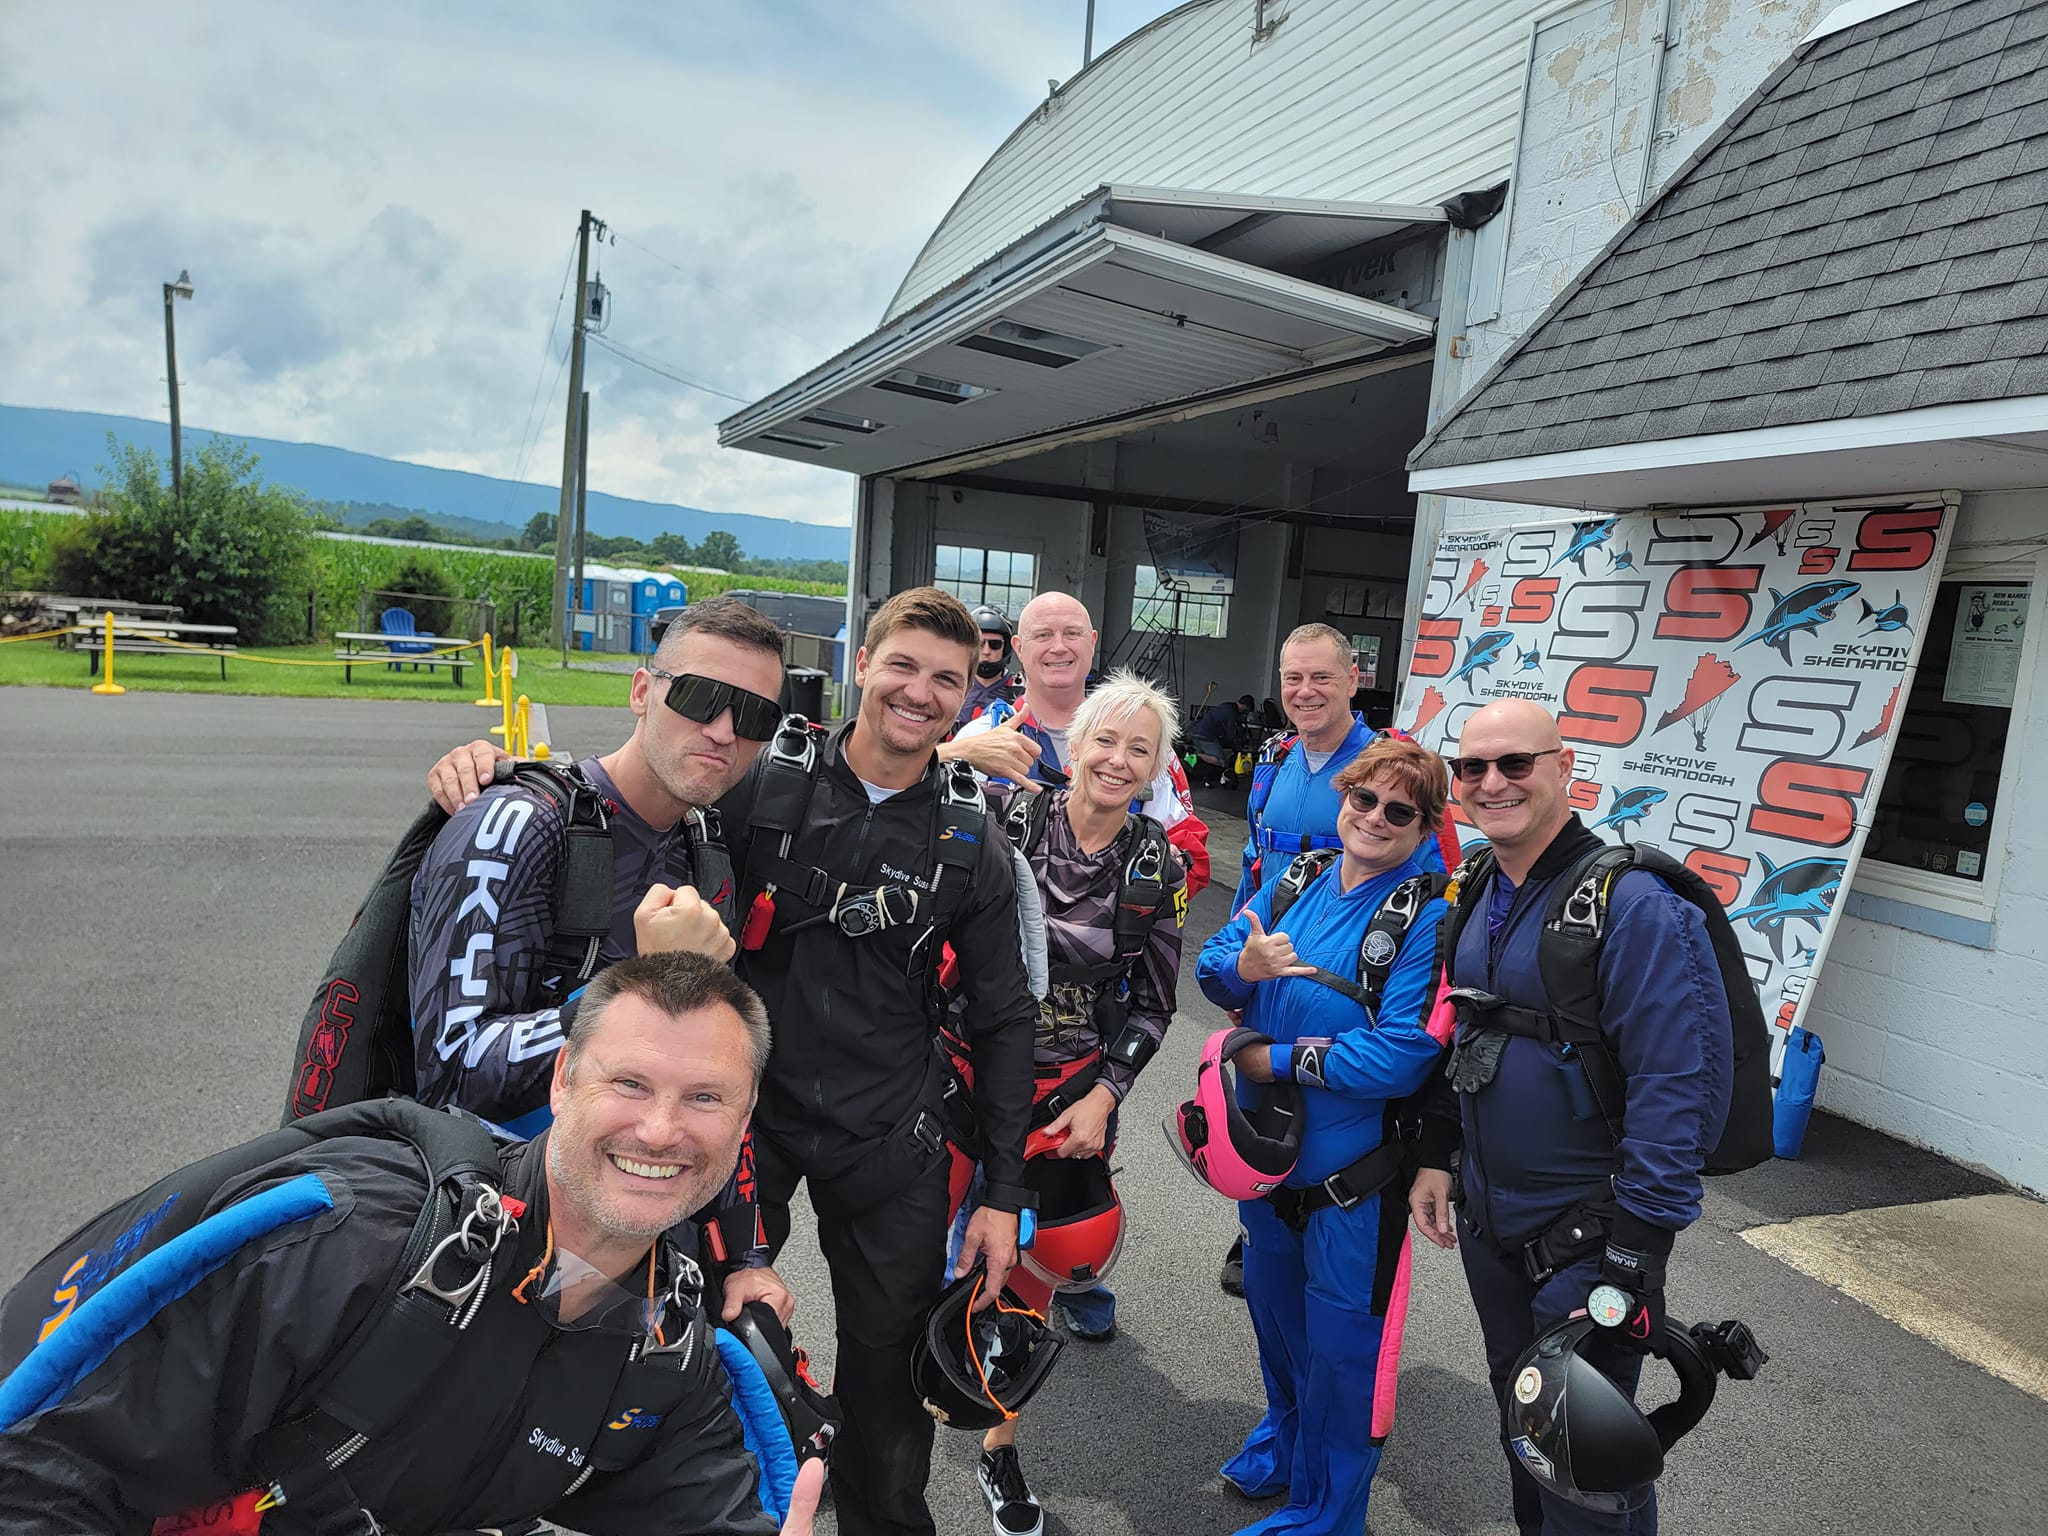 a group of jumpers getting ready to skydive at skydive shenandoah 